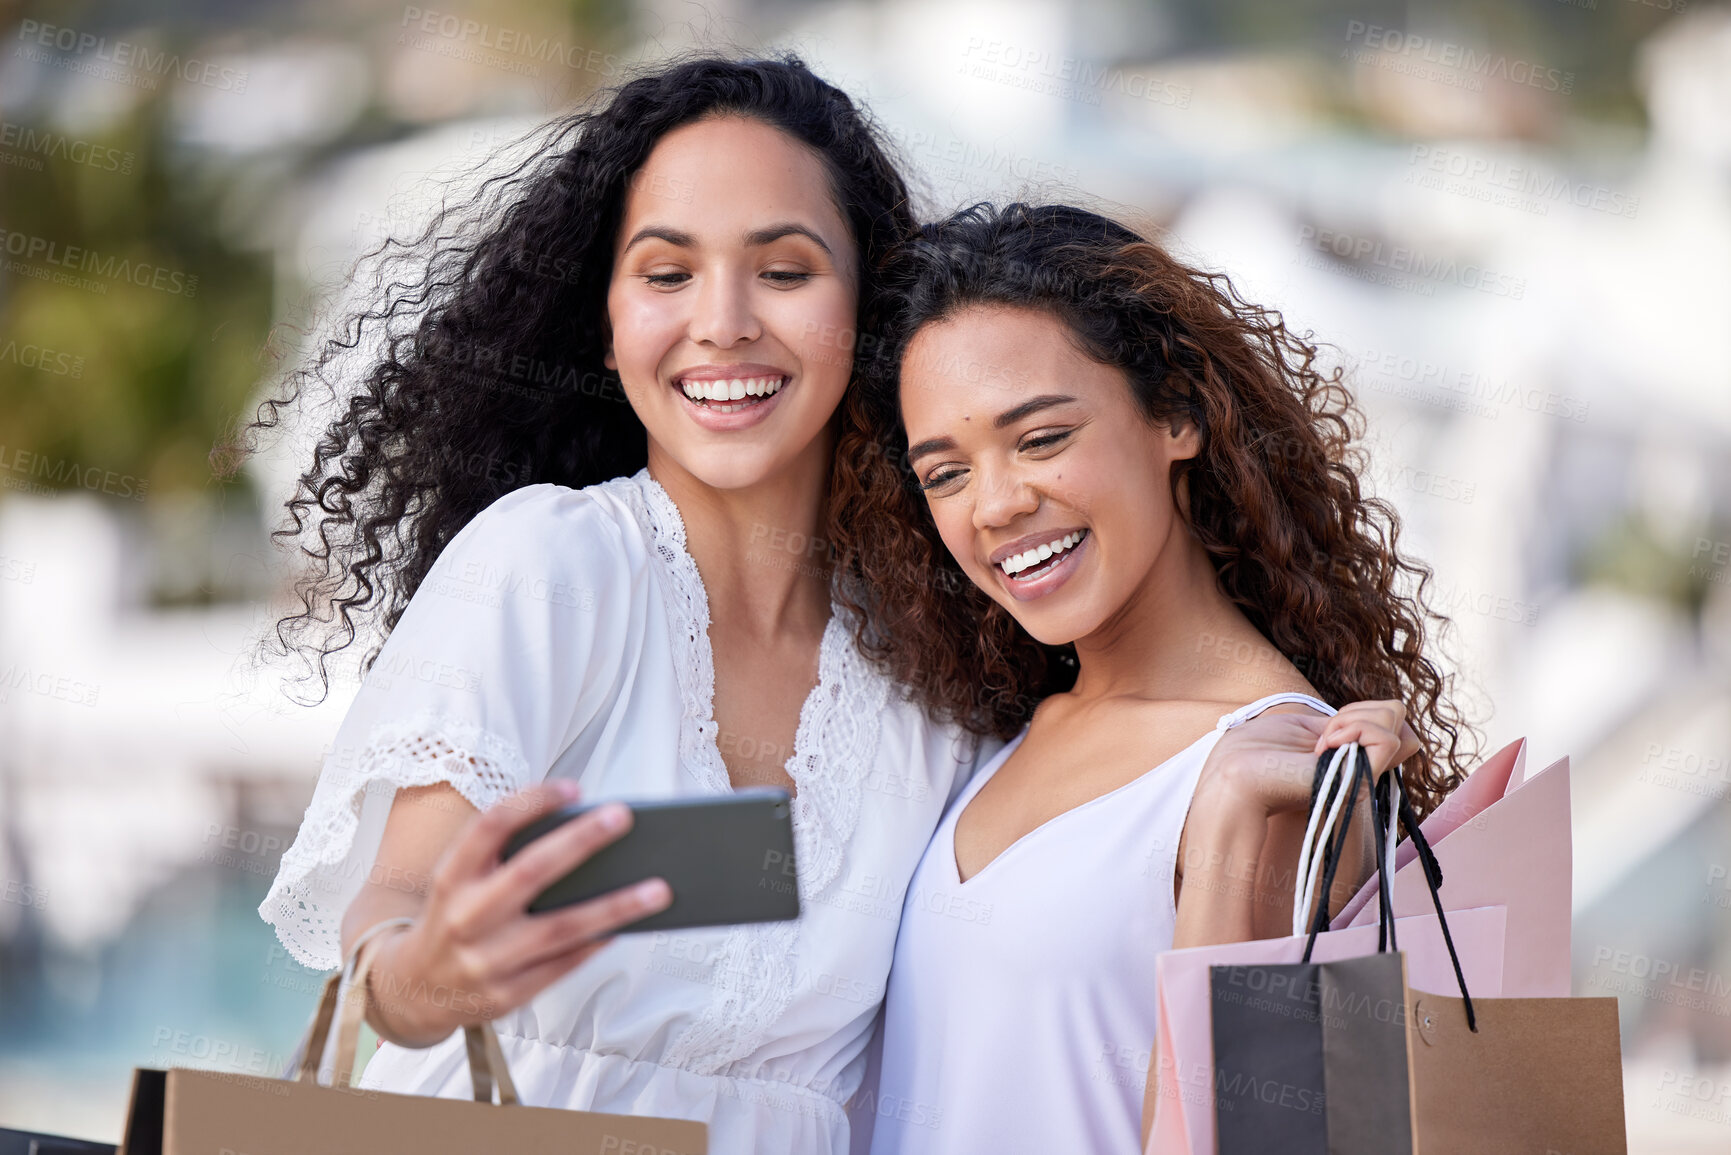 Buy stock photo Shot of two young women taking selfies while shopping against an urban background